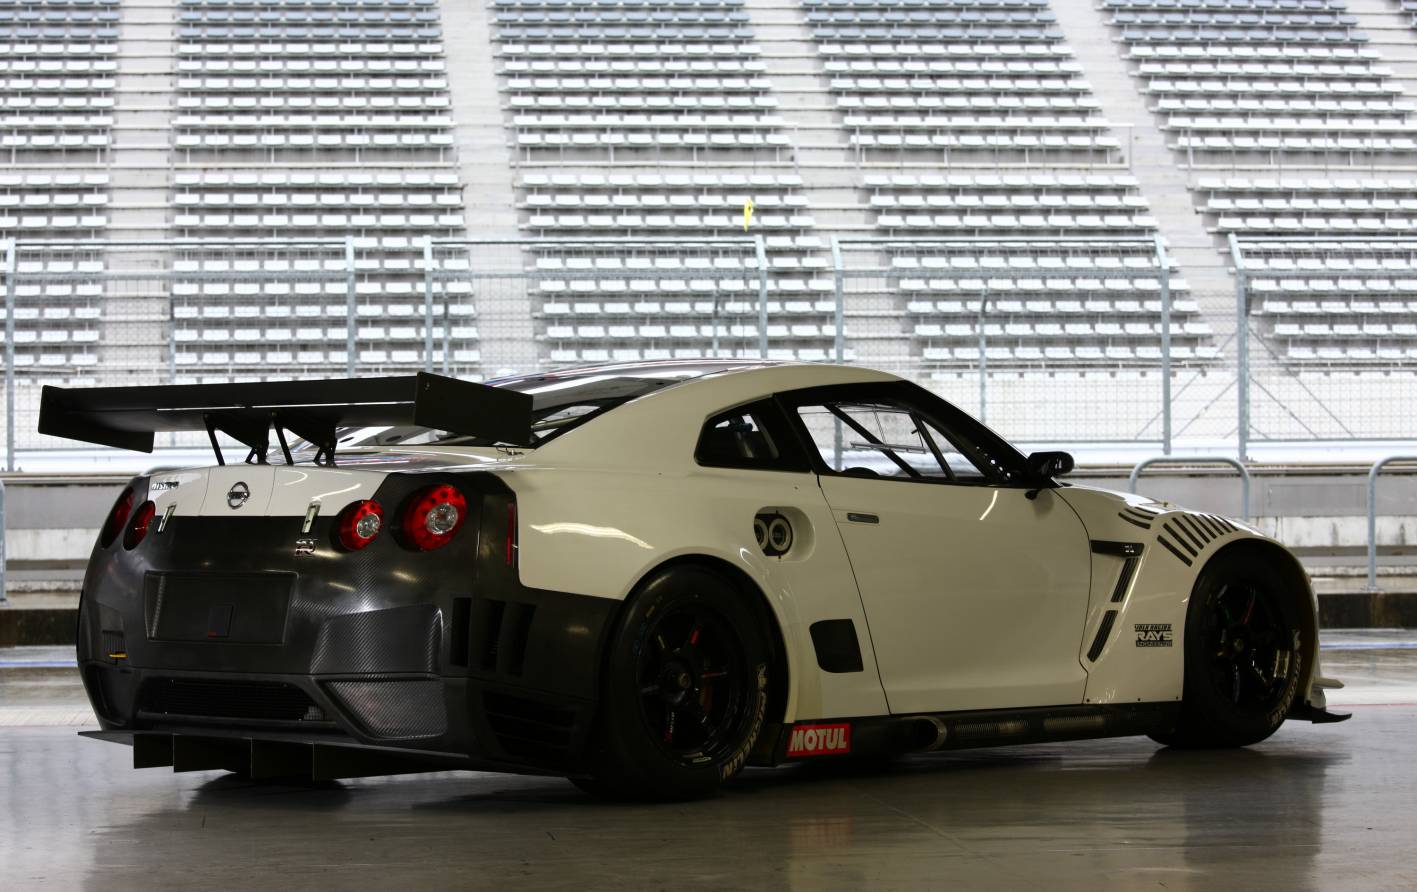 R35 Nismo Nissan GT-R set to be quickest GT-R ever – report